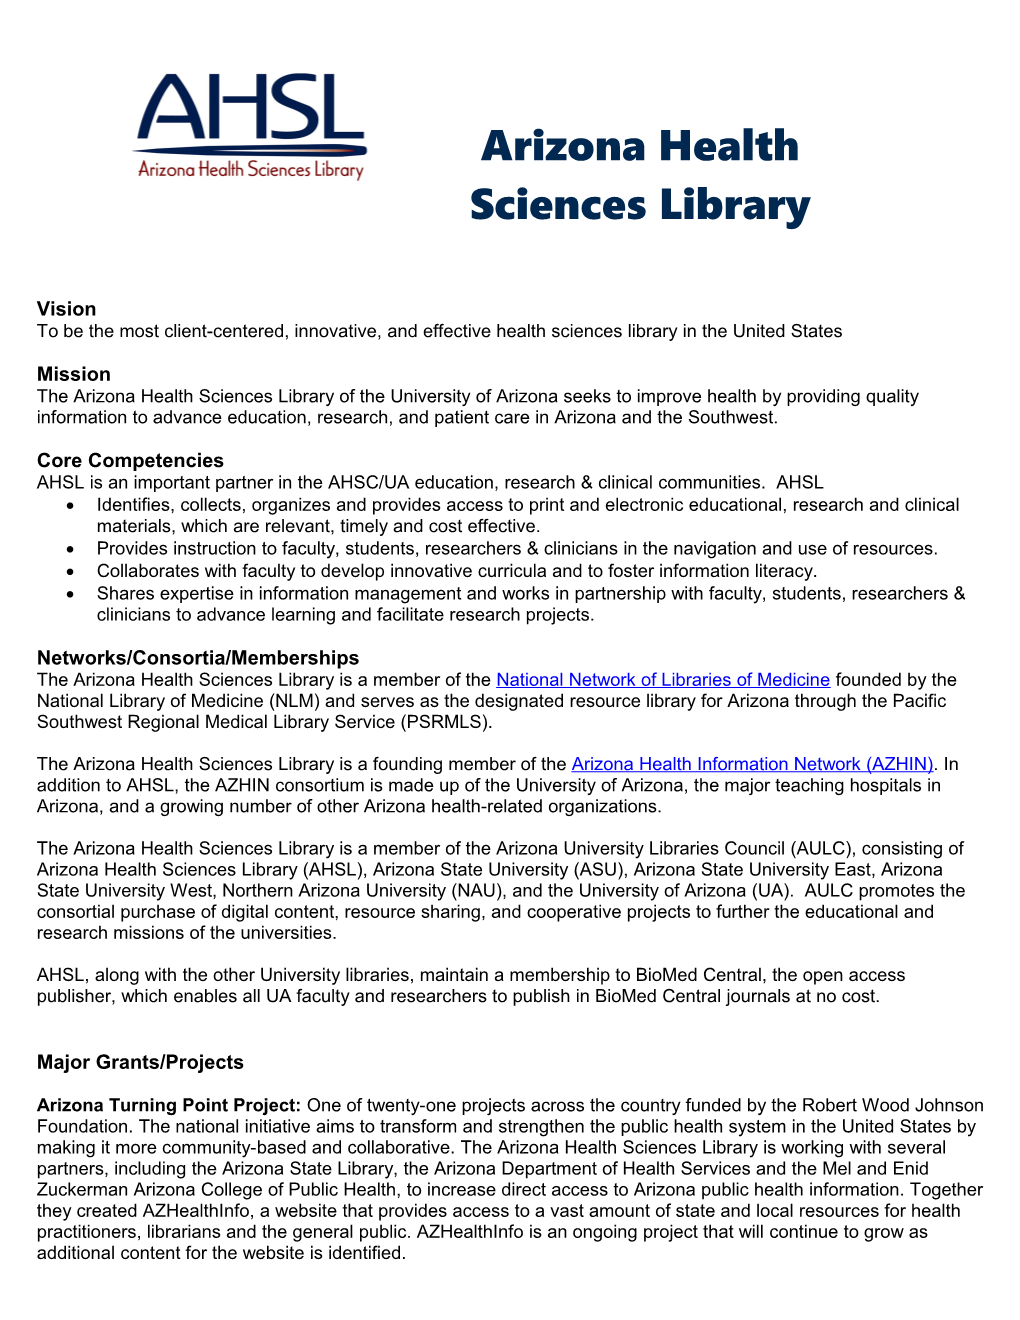 To Be the Most Client-Centered, Innovative, and Effective Health Sciences Library in The